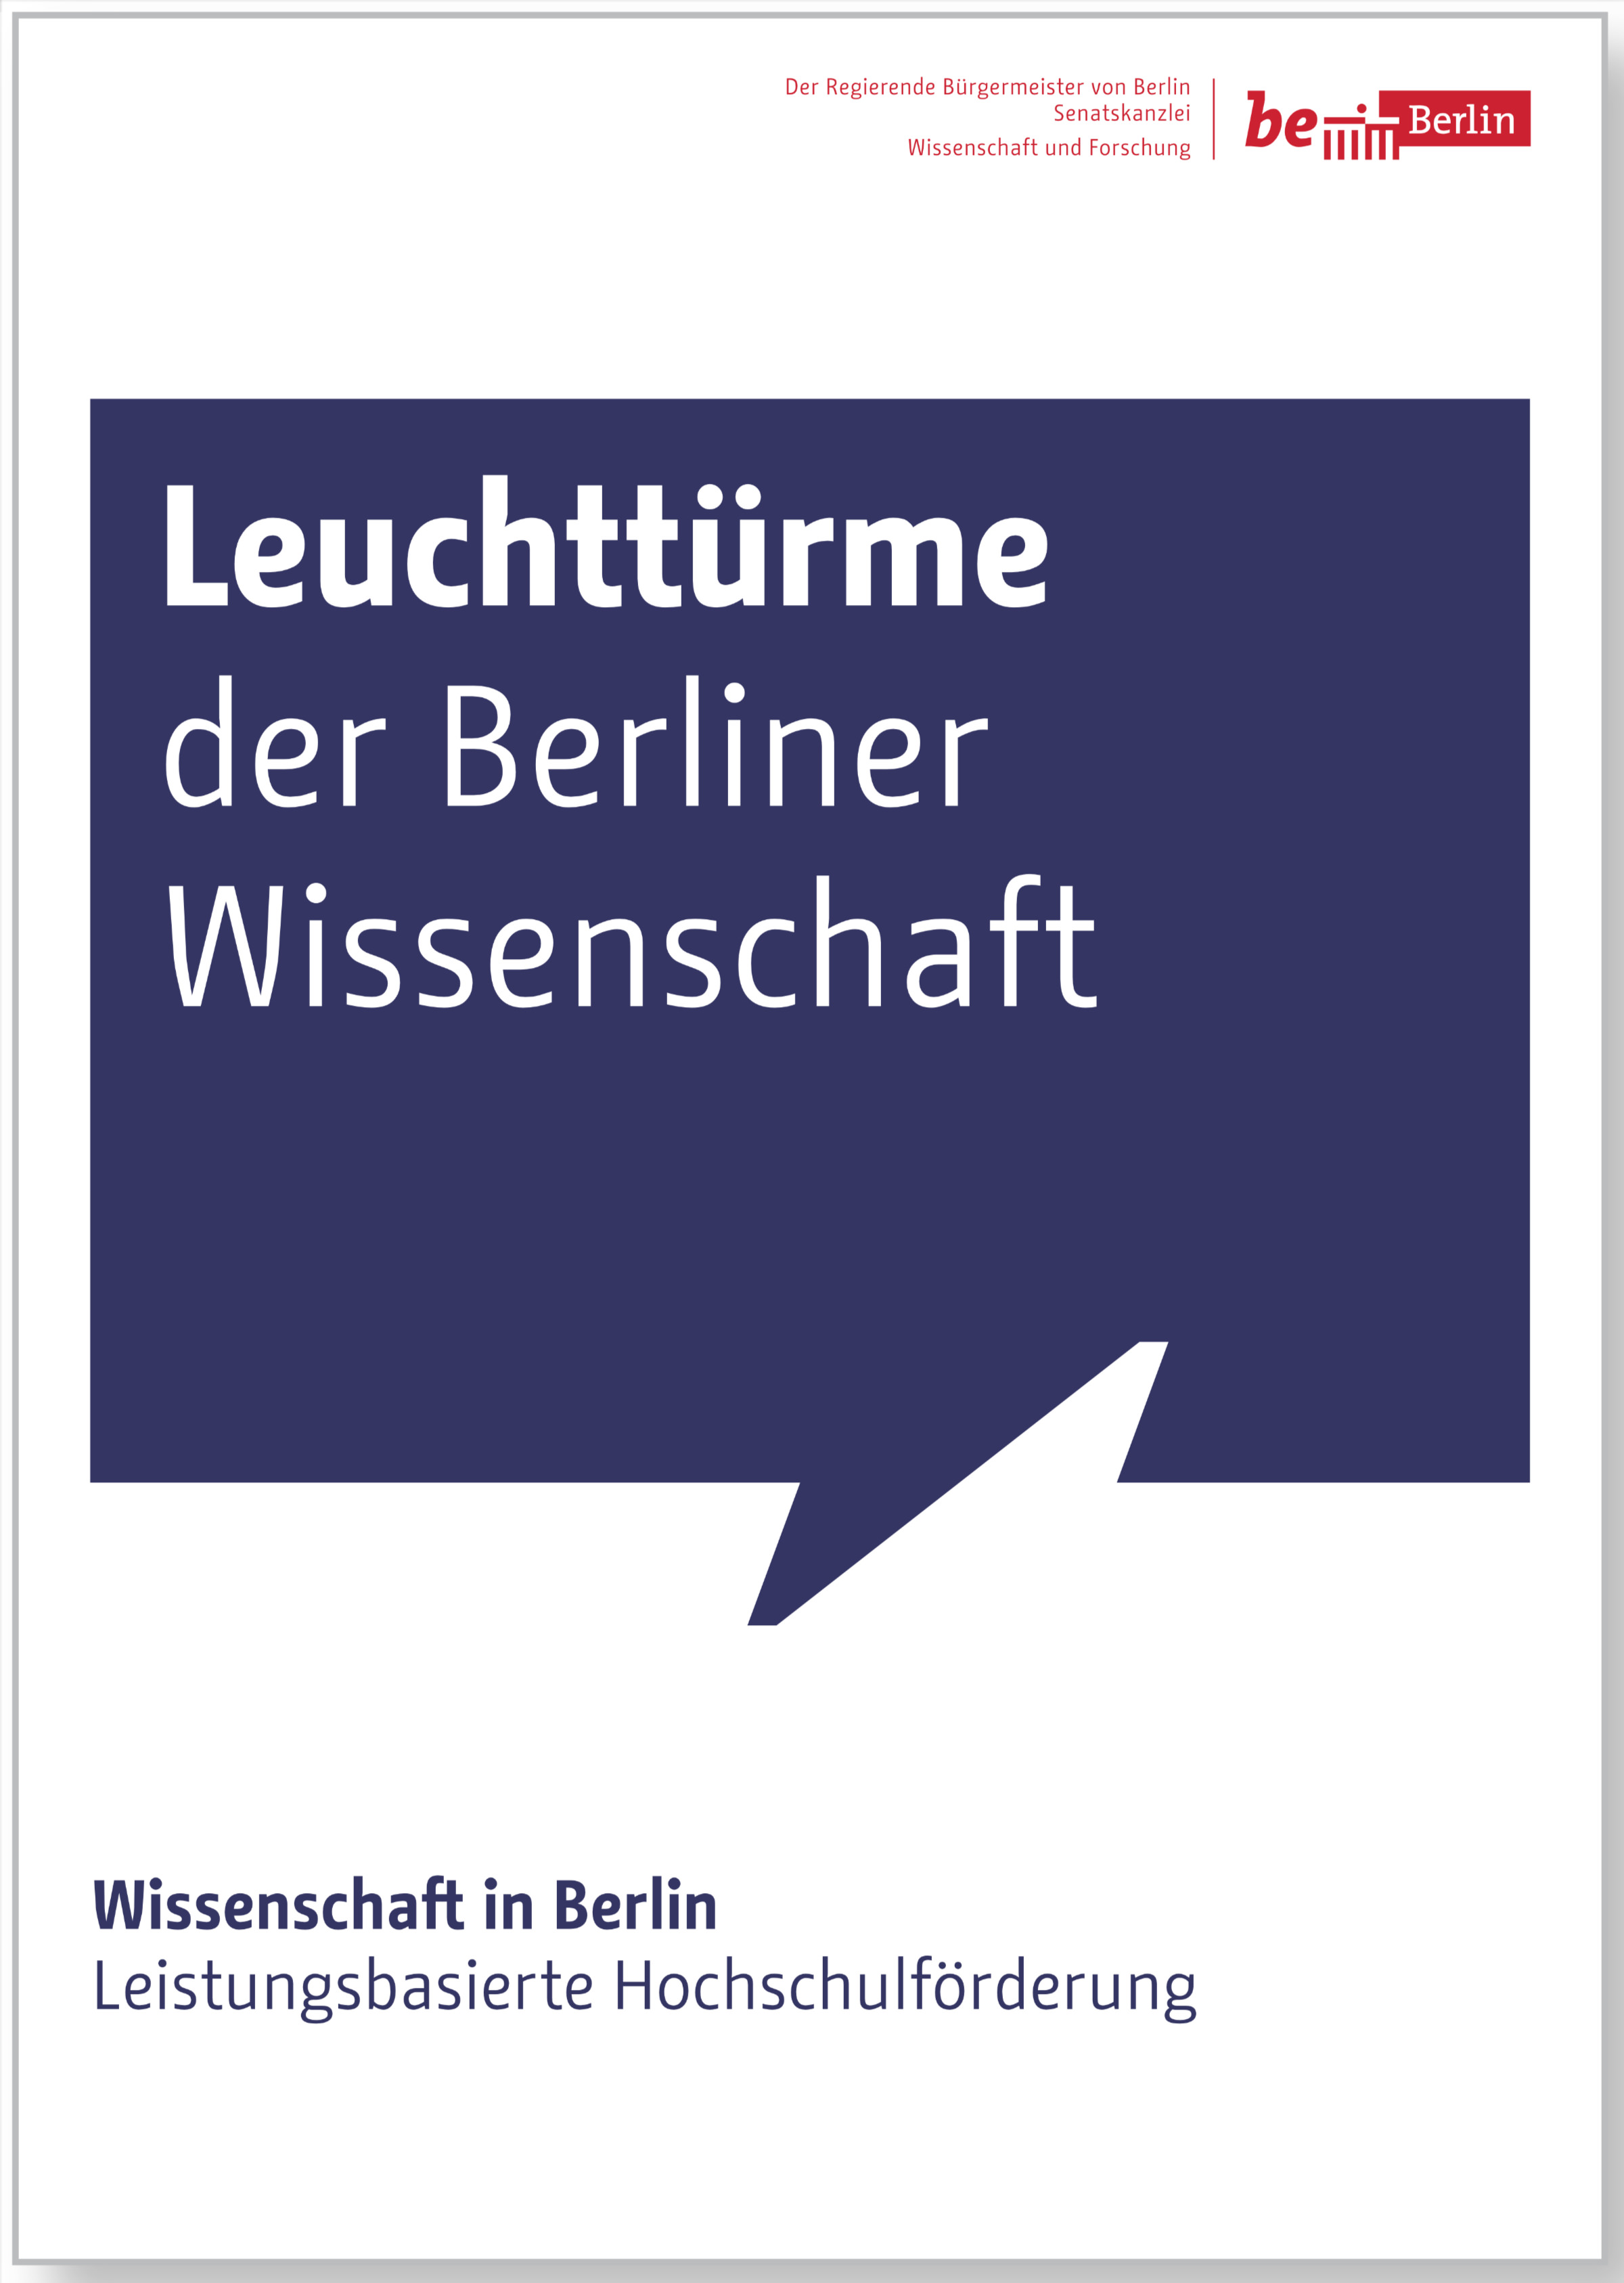 One of countless brochures published by the Berlin Senate using Change